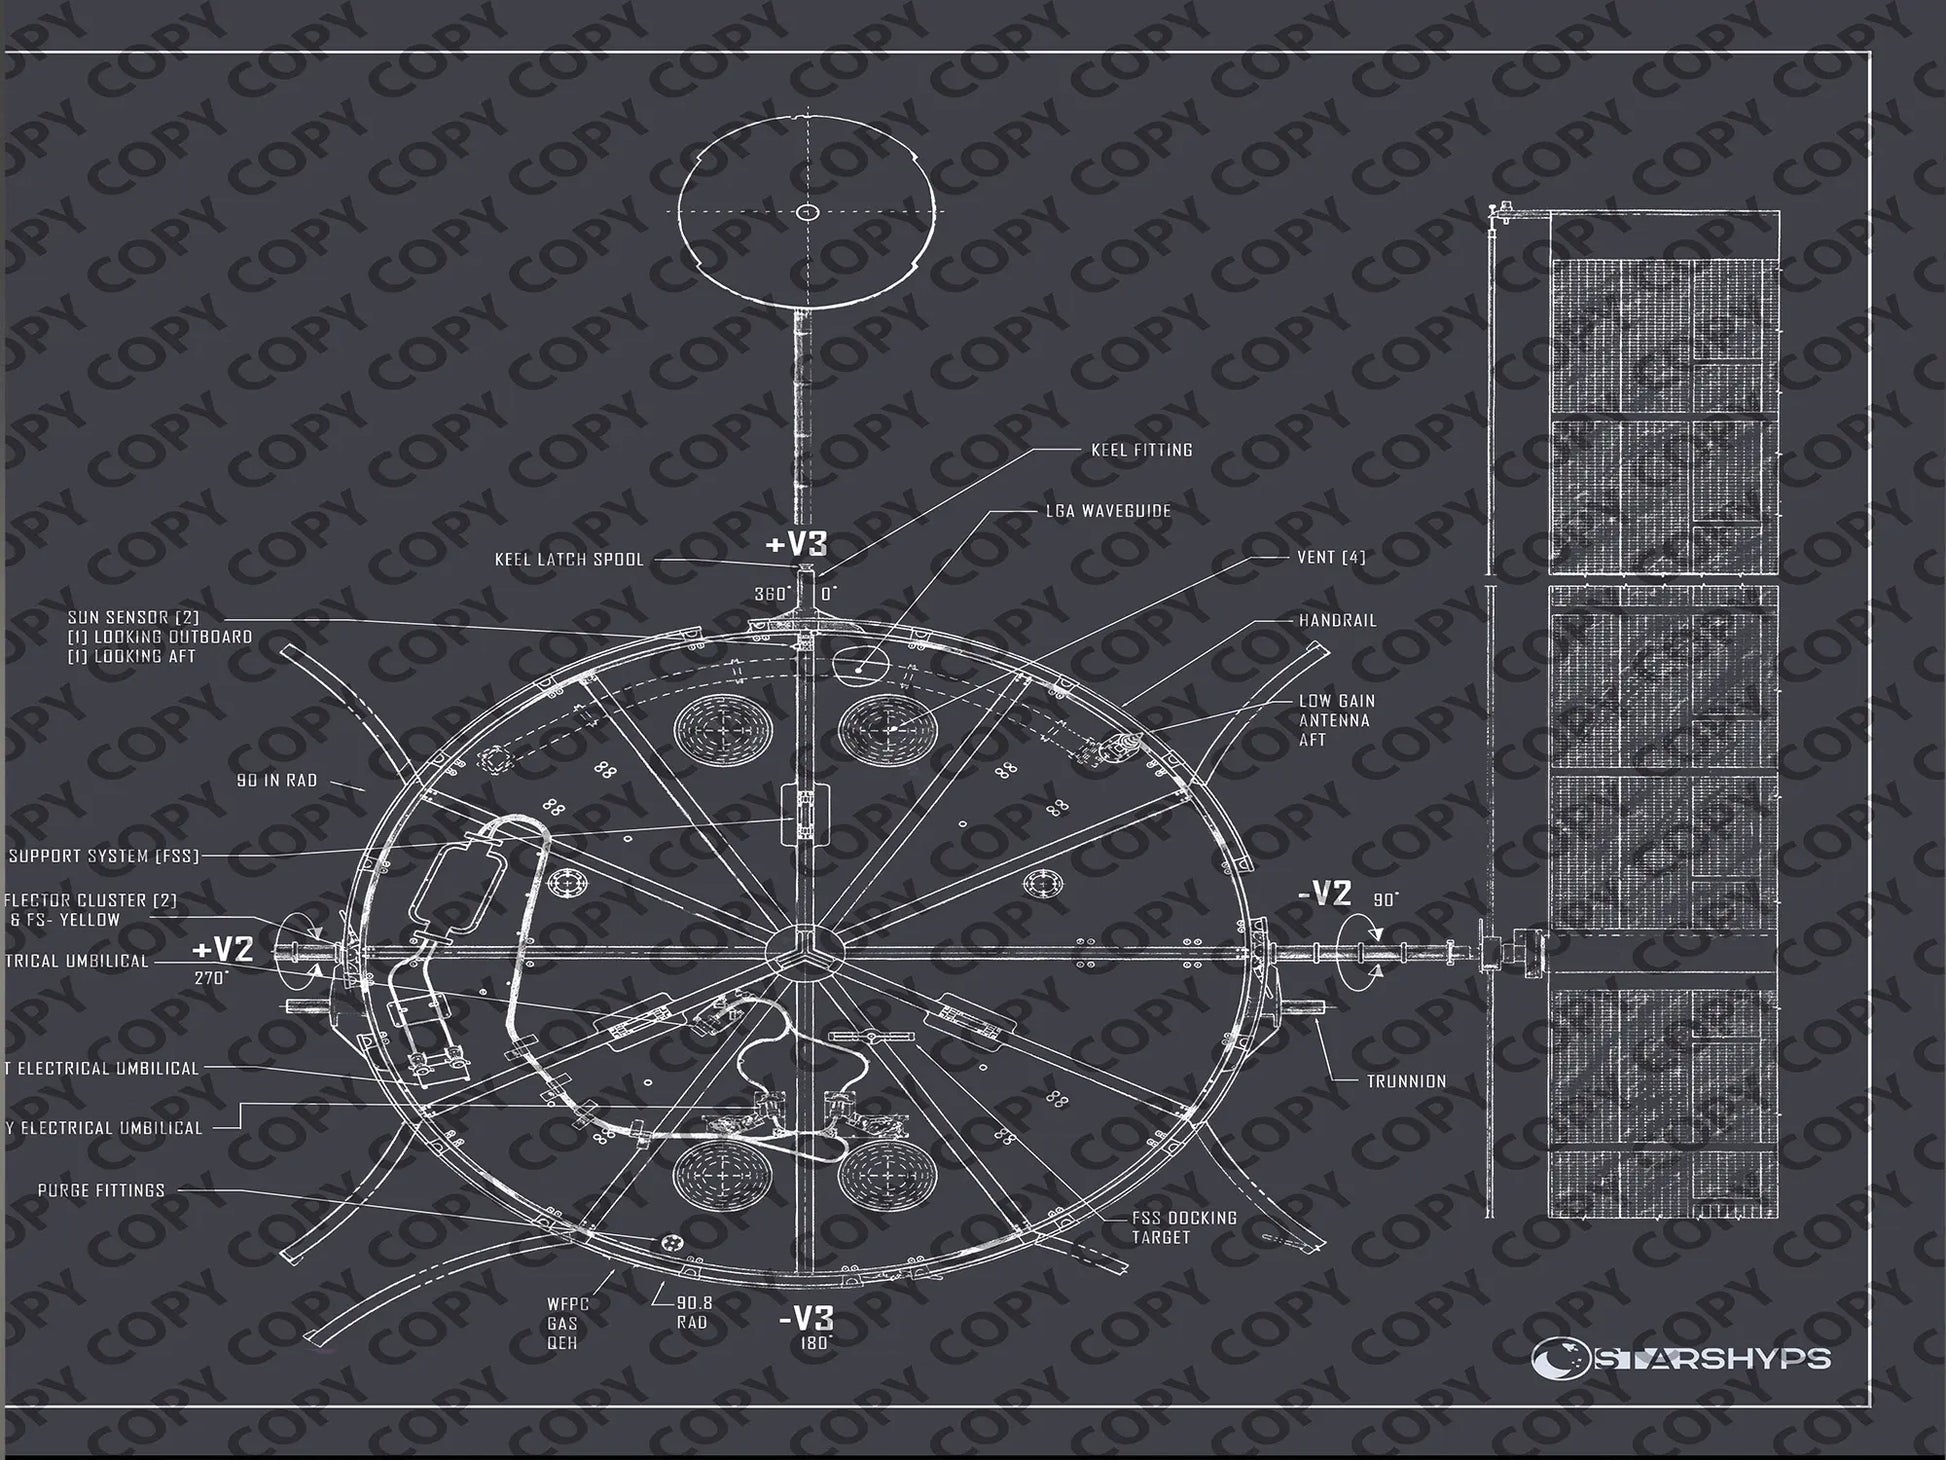 Hubble Space Telescope Blueprint | Rocket Blueprint Posters | A close-up view of the Hubble Space Telescope blueprint, highlighting technical diagrams and labels. The section includes components such as the support system, reflector cluster, and electrical umbilical against a dark background.